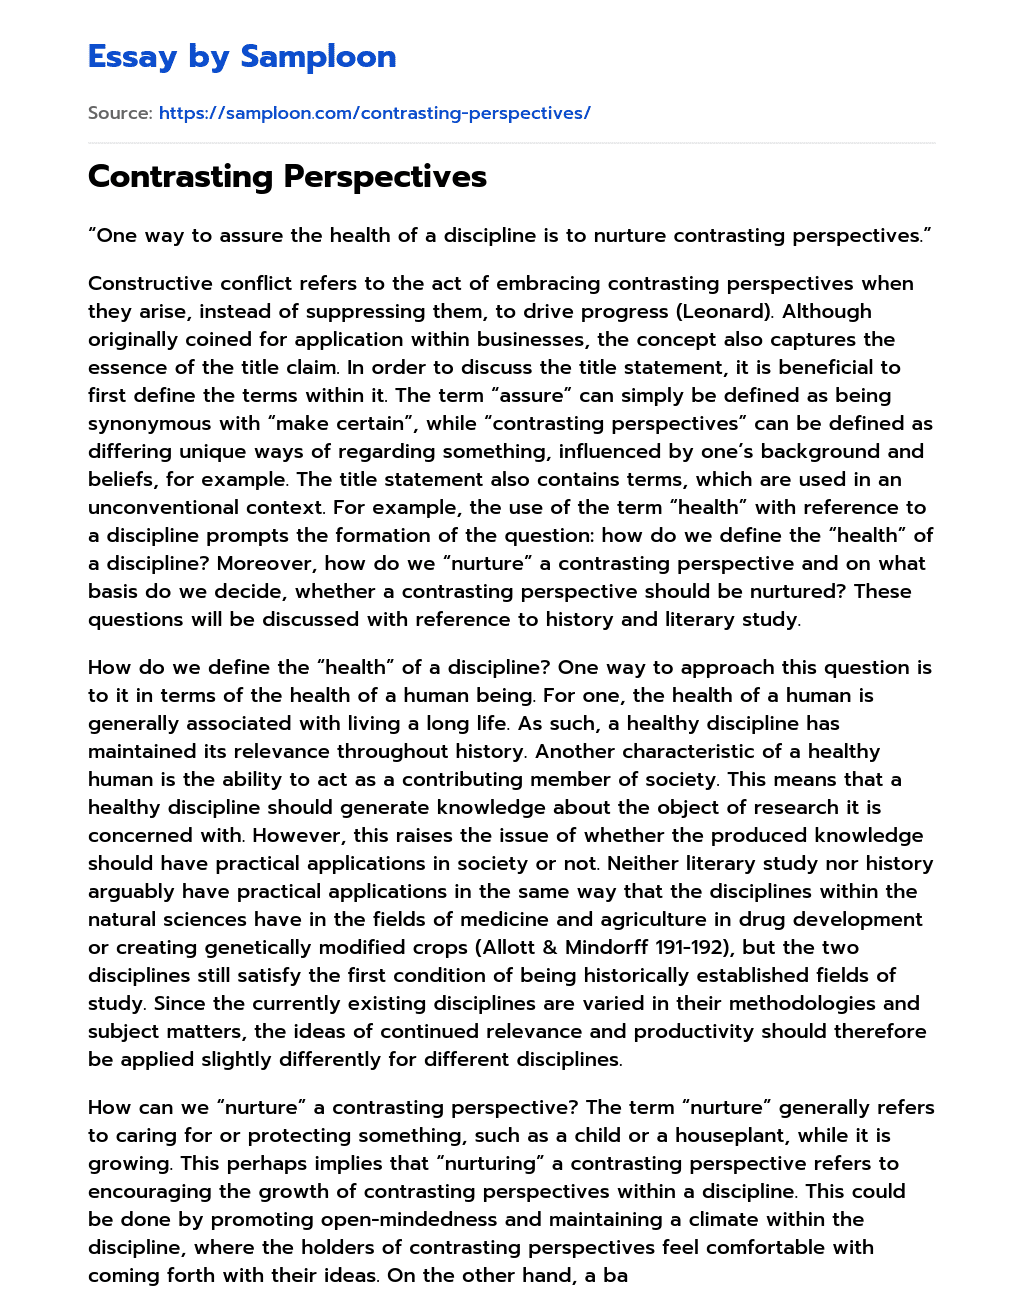 Contrasting Perspectives essay